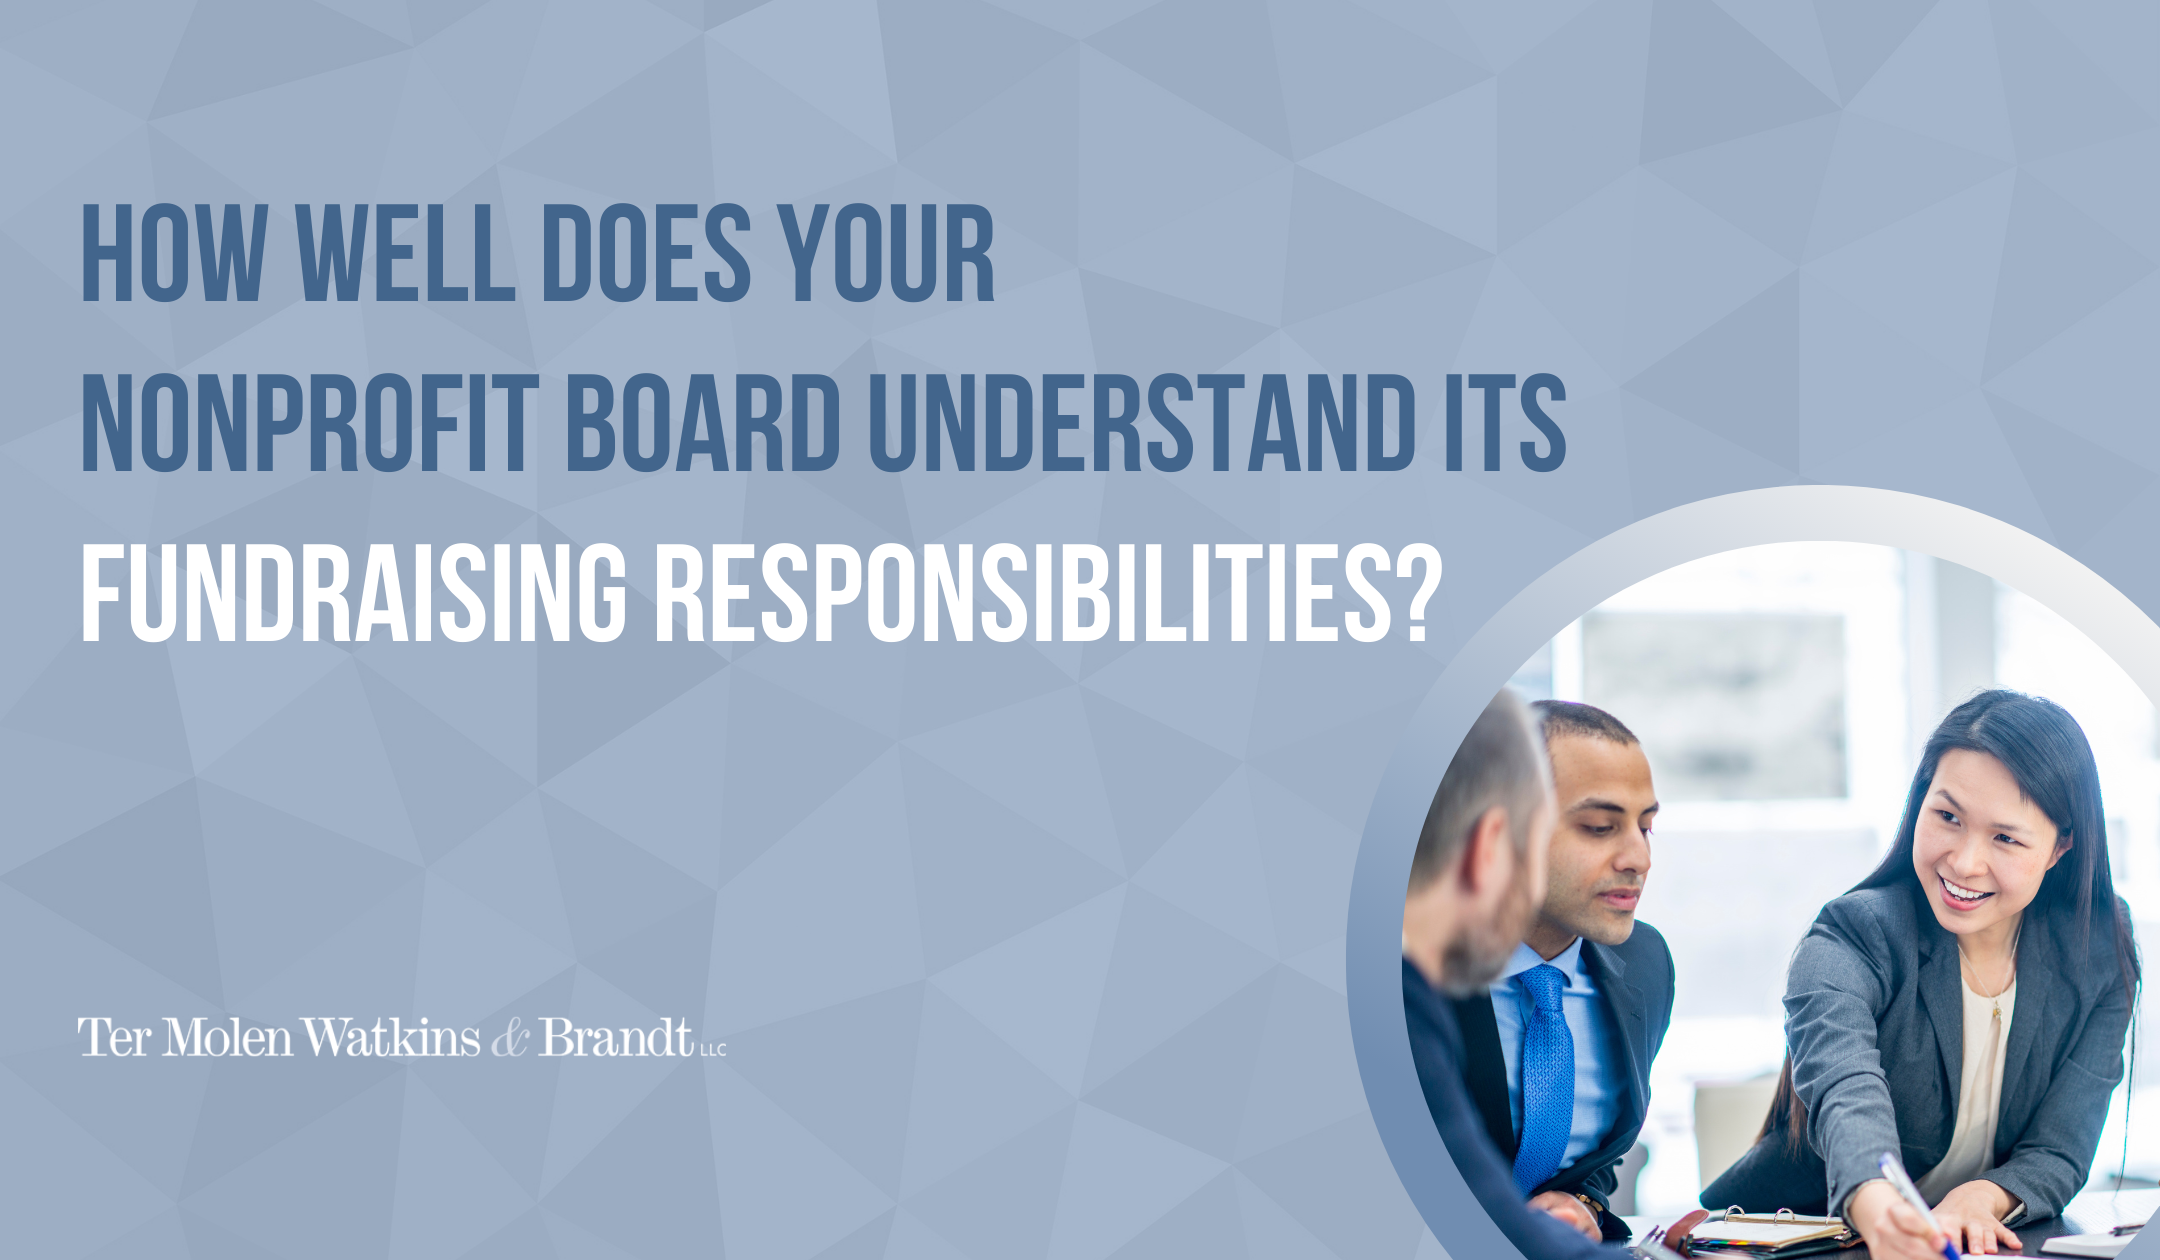 How Well Does Your Nonprofit Board Understand Its Fundraising Responsibilities?